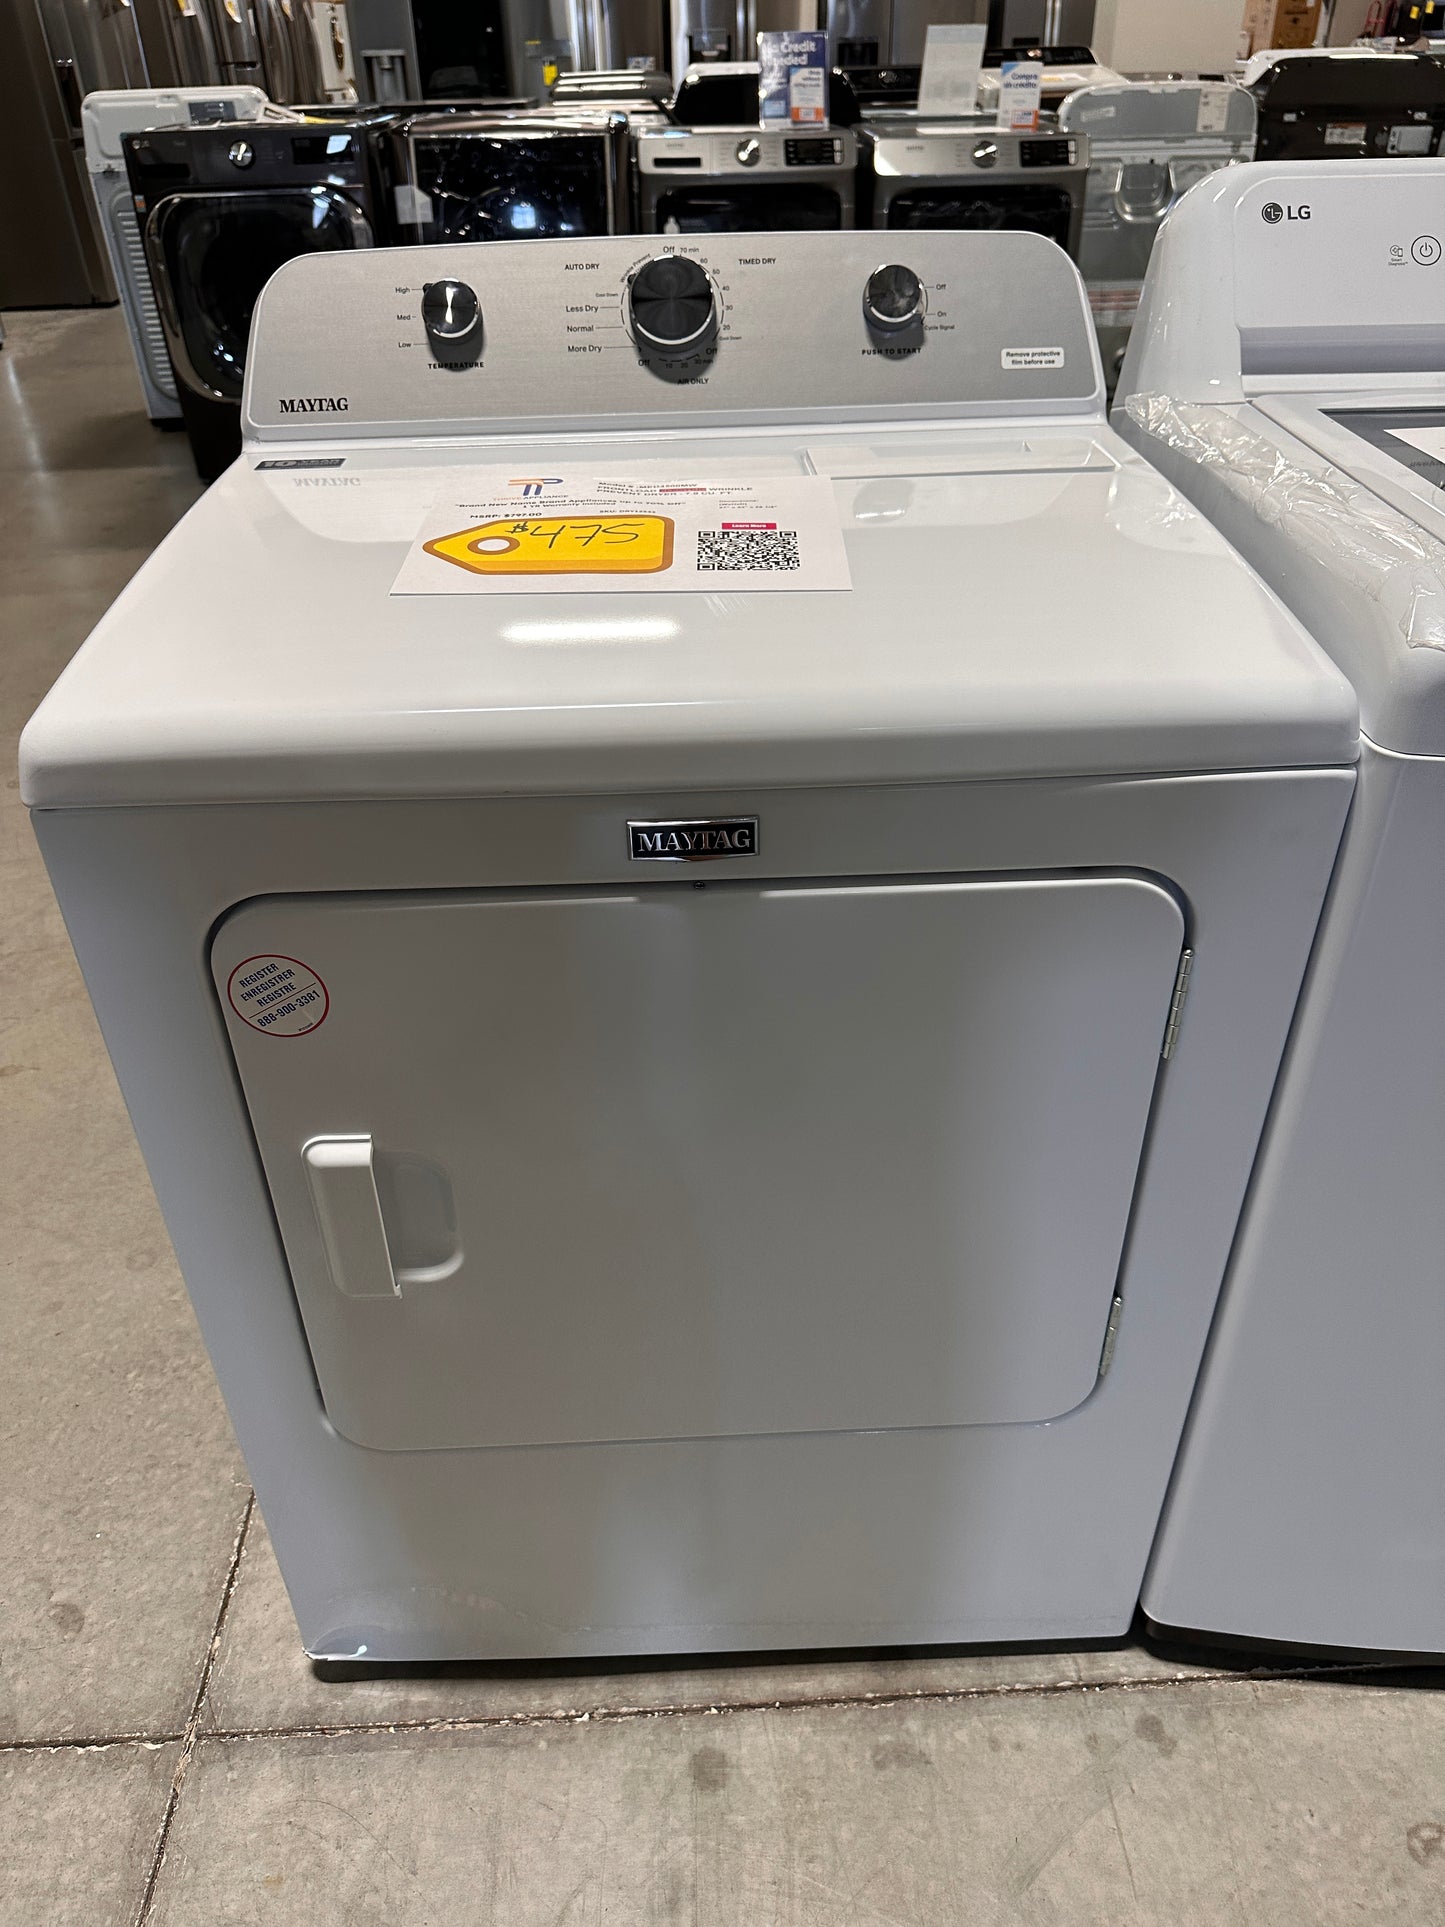 Maytag - 7.0 Cu. Ft. Electric Dryer with Wrinkle Prevent - White  Model:MED4500MW  DRY12342